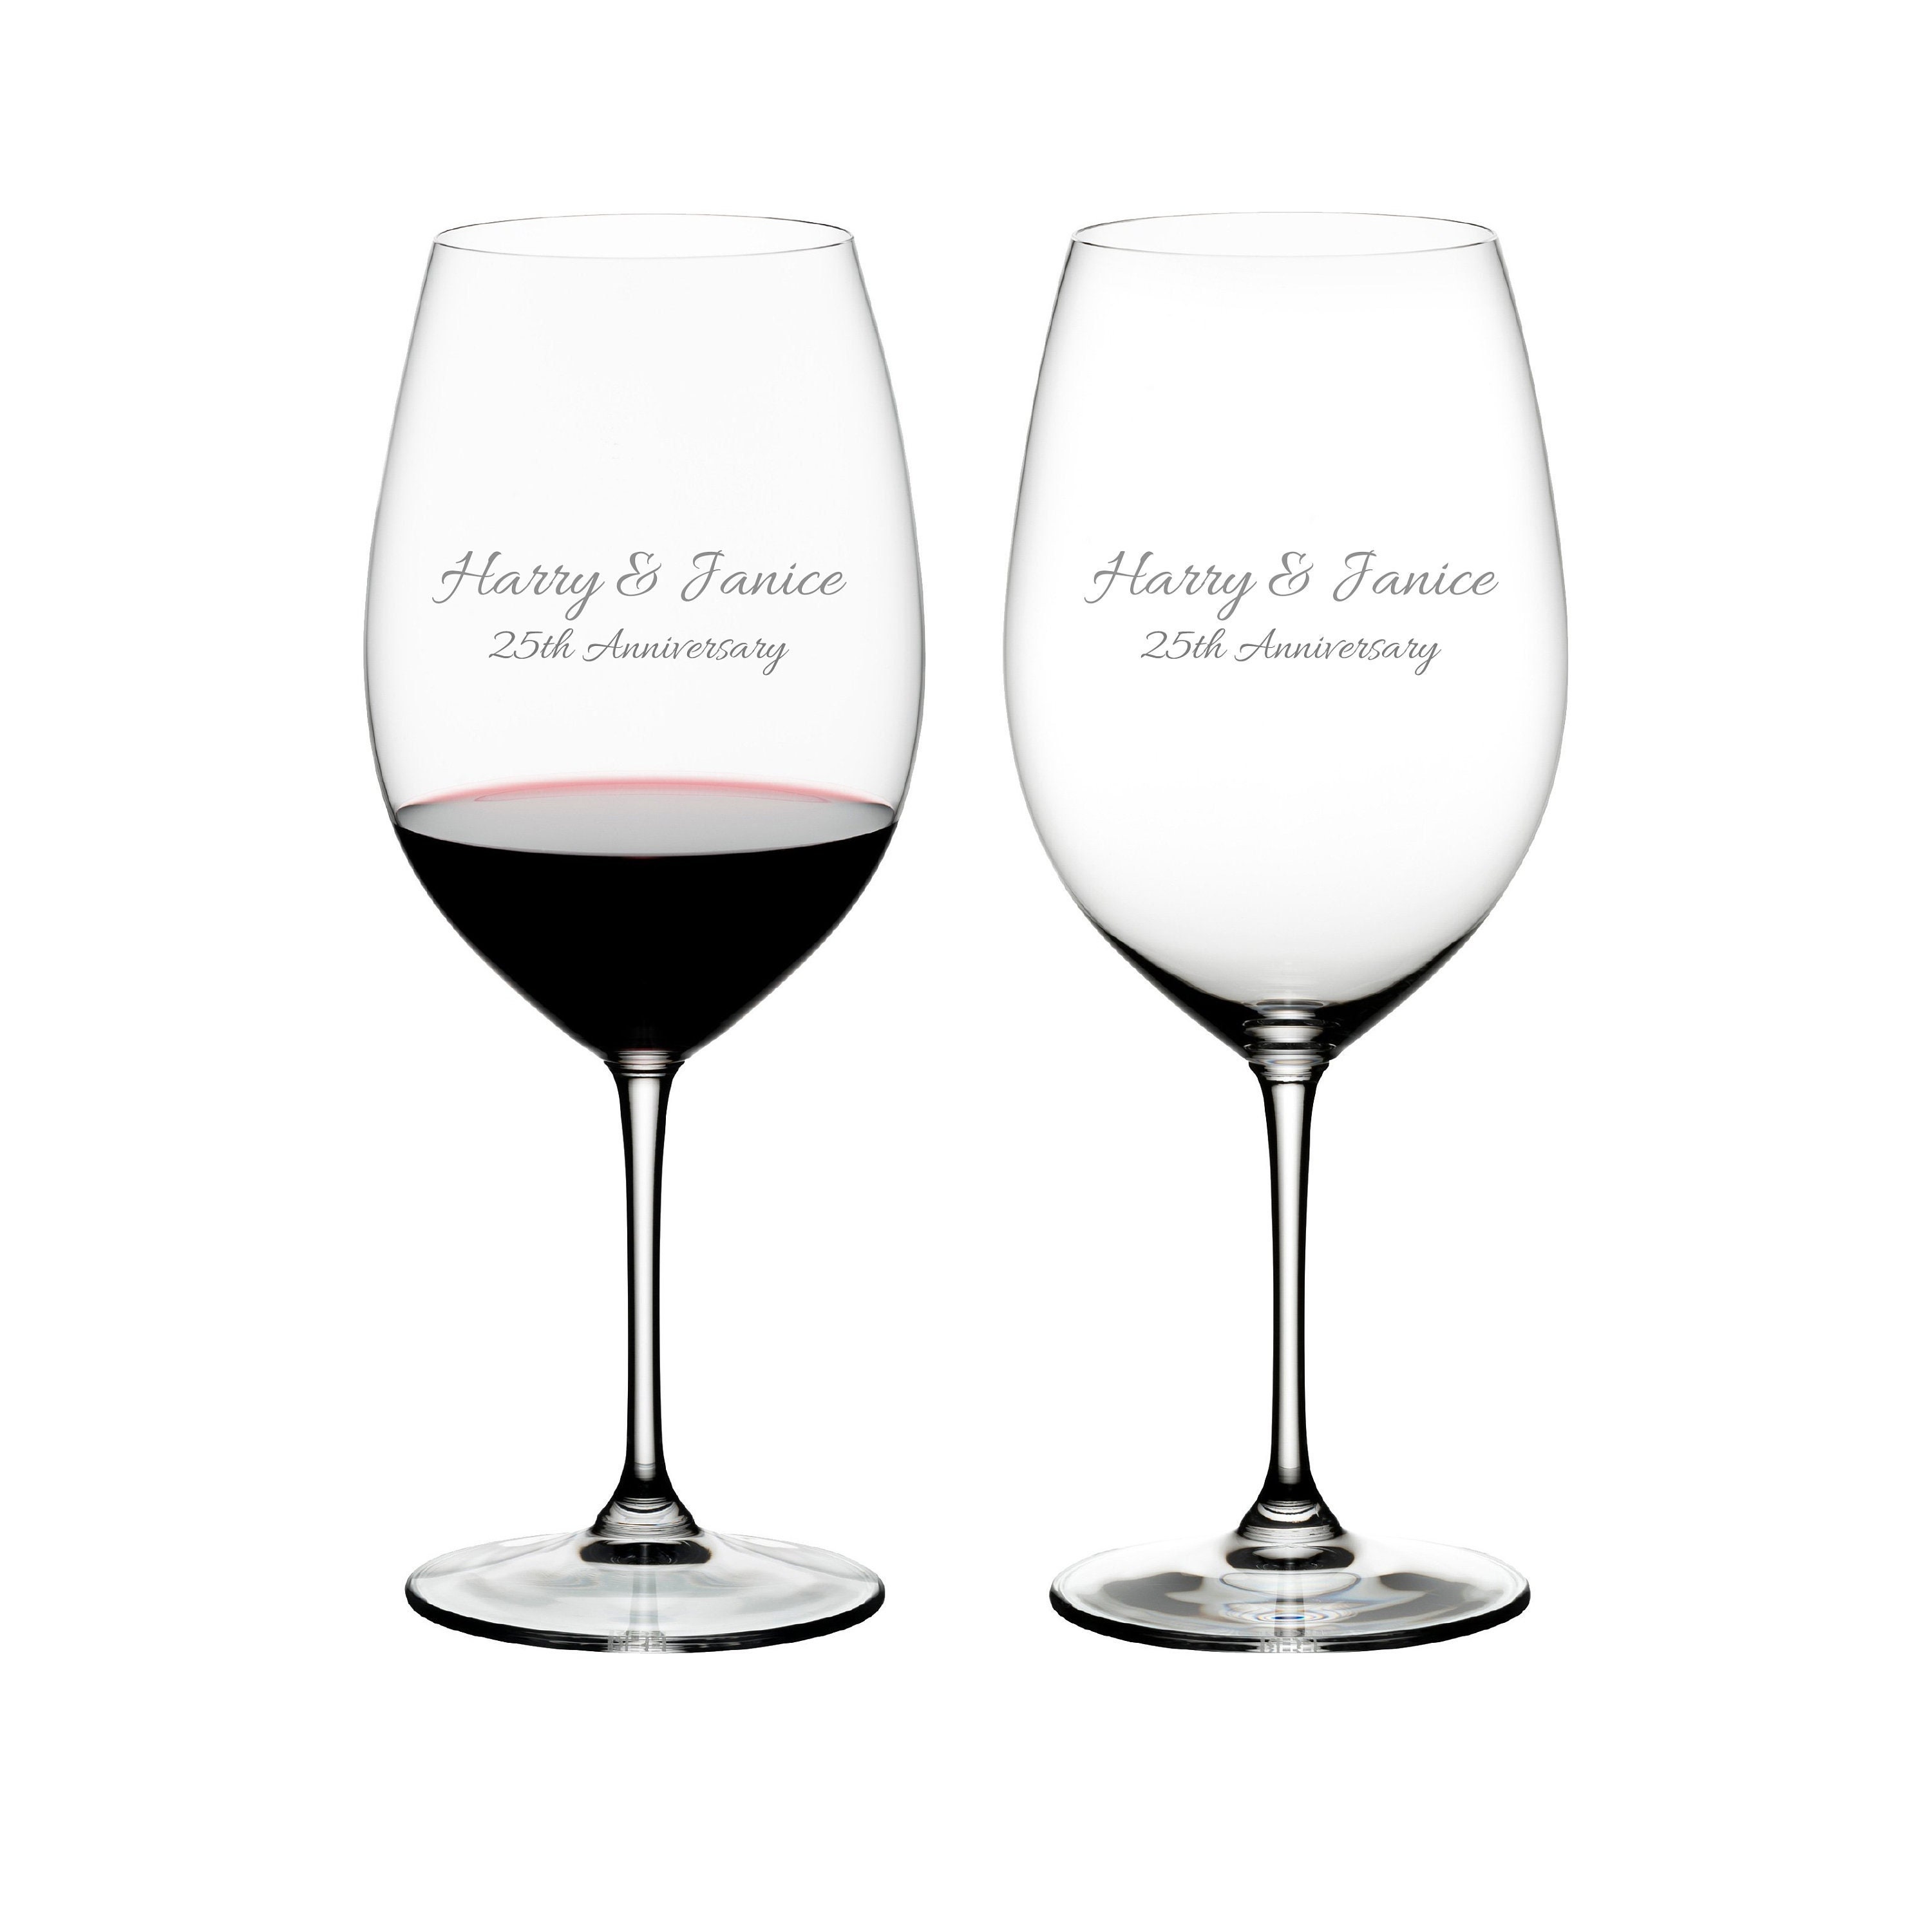 Personalized Epicure Crystal All-Purpose Wine Glasses Set/4